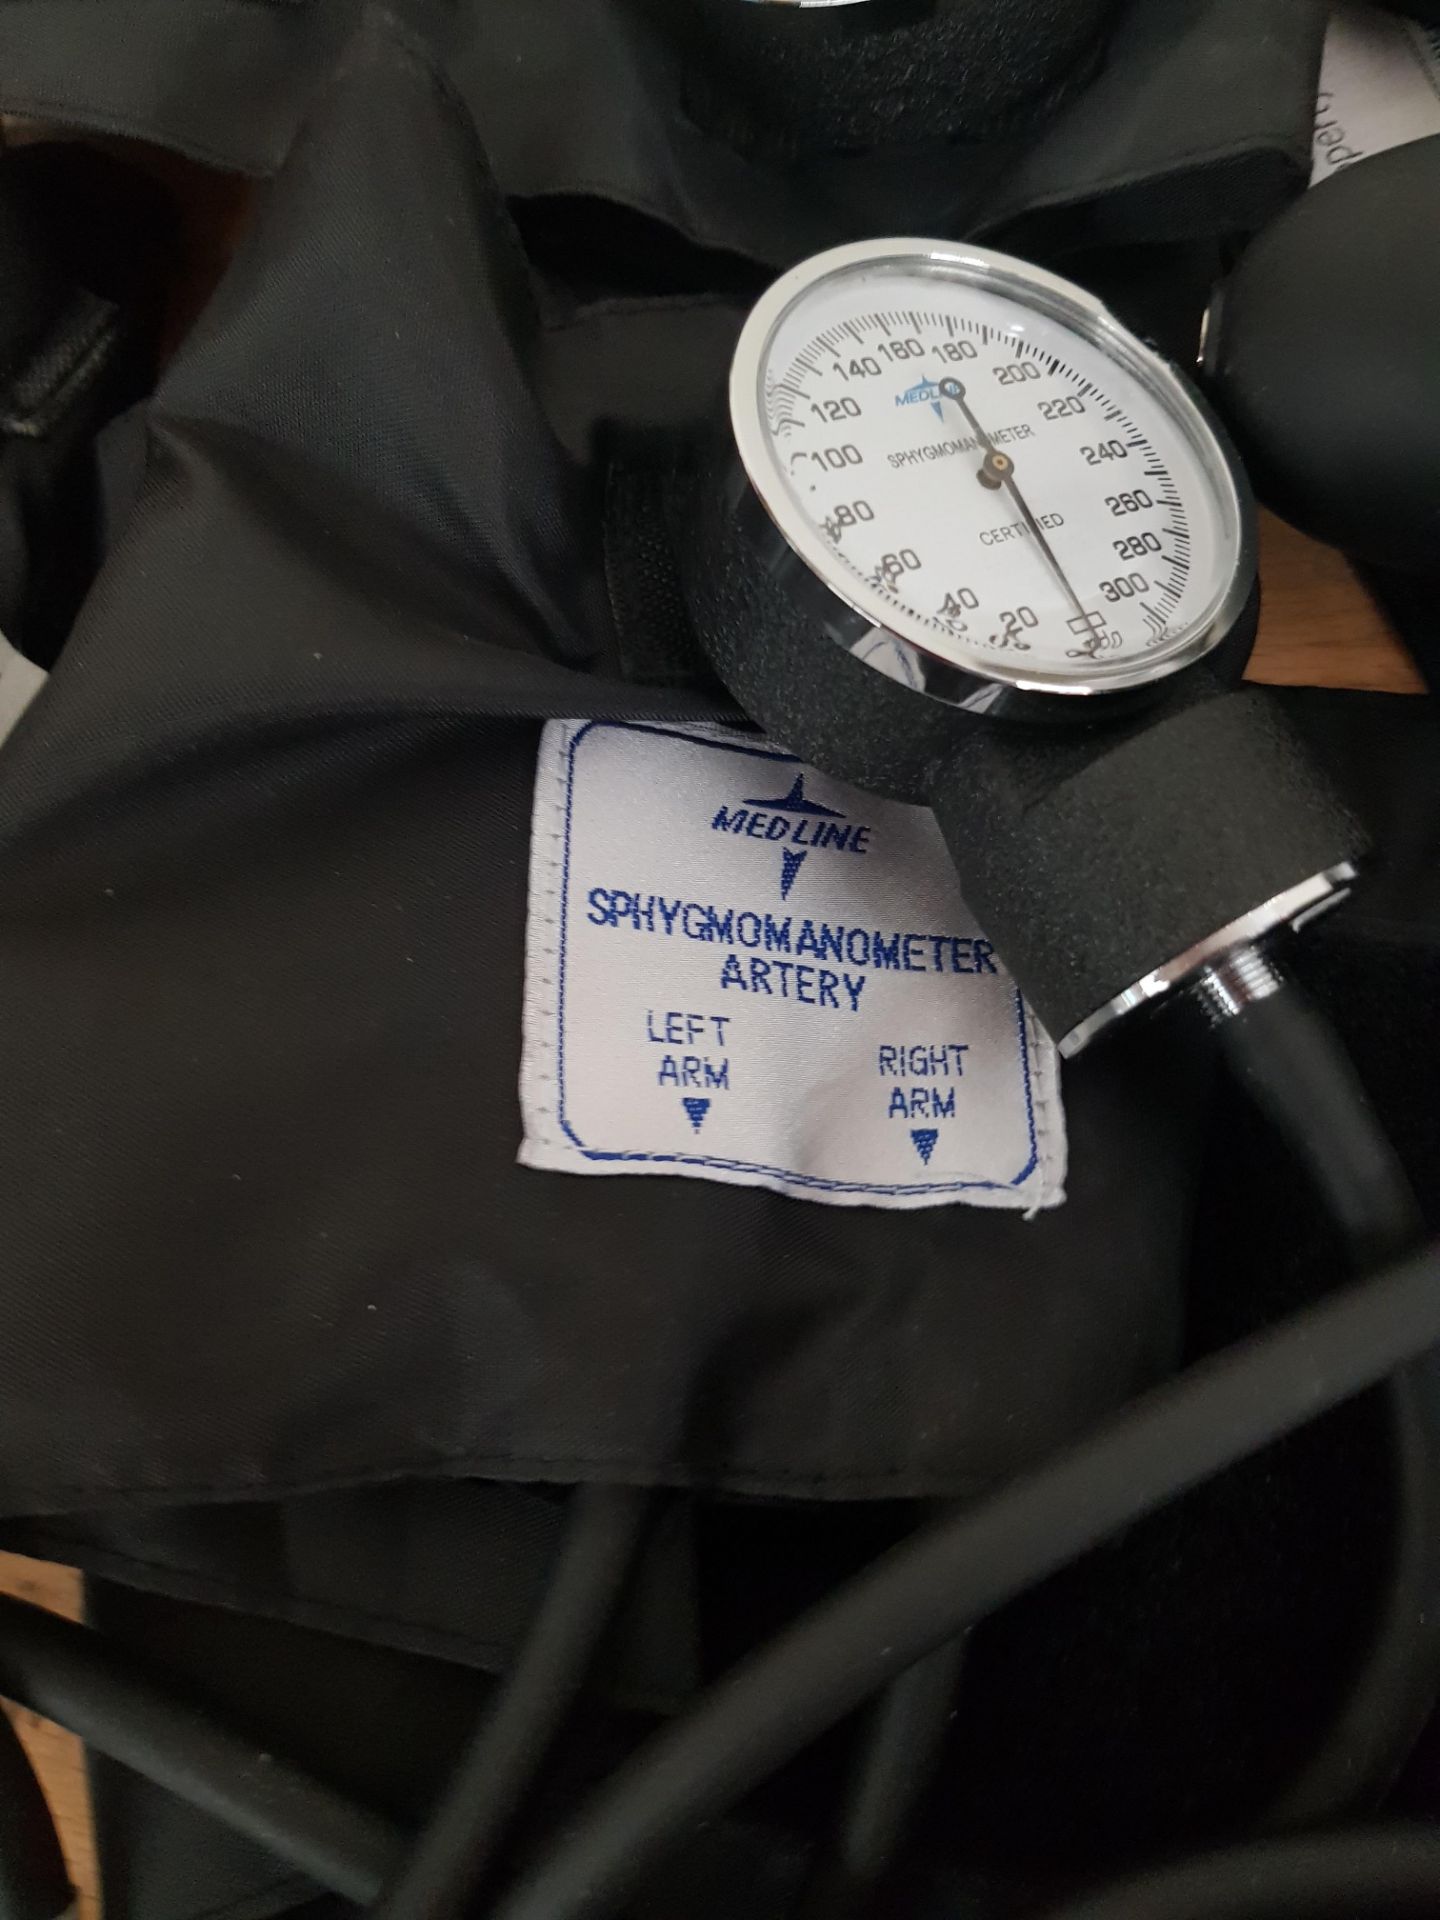 LOT OF VARIOUS SPHYGMOMANOMETERS AND CUFFS INCLUDING OMRON - Image 3 of 5